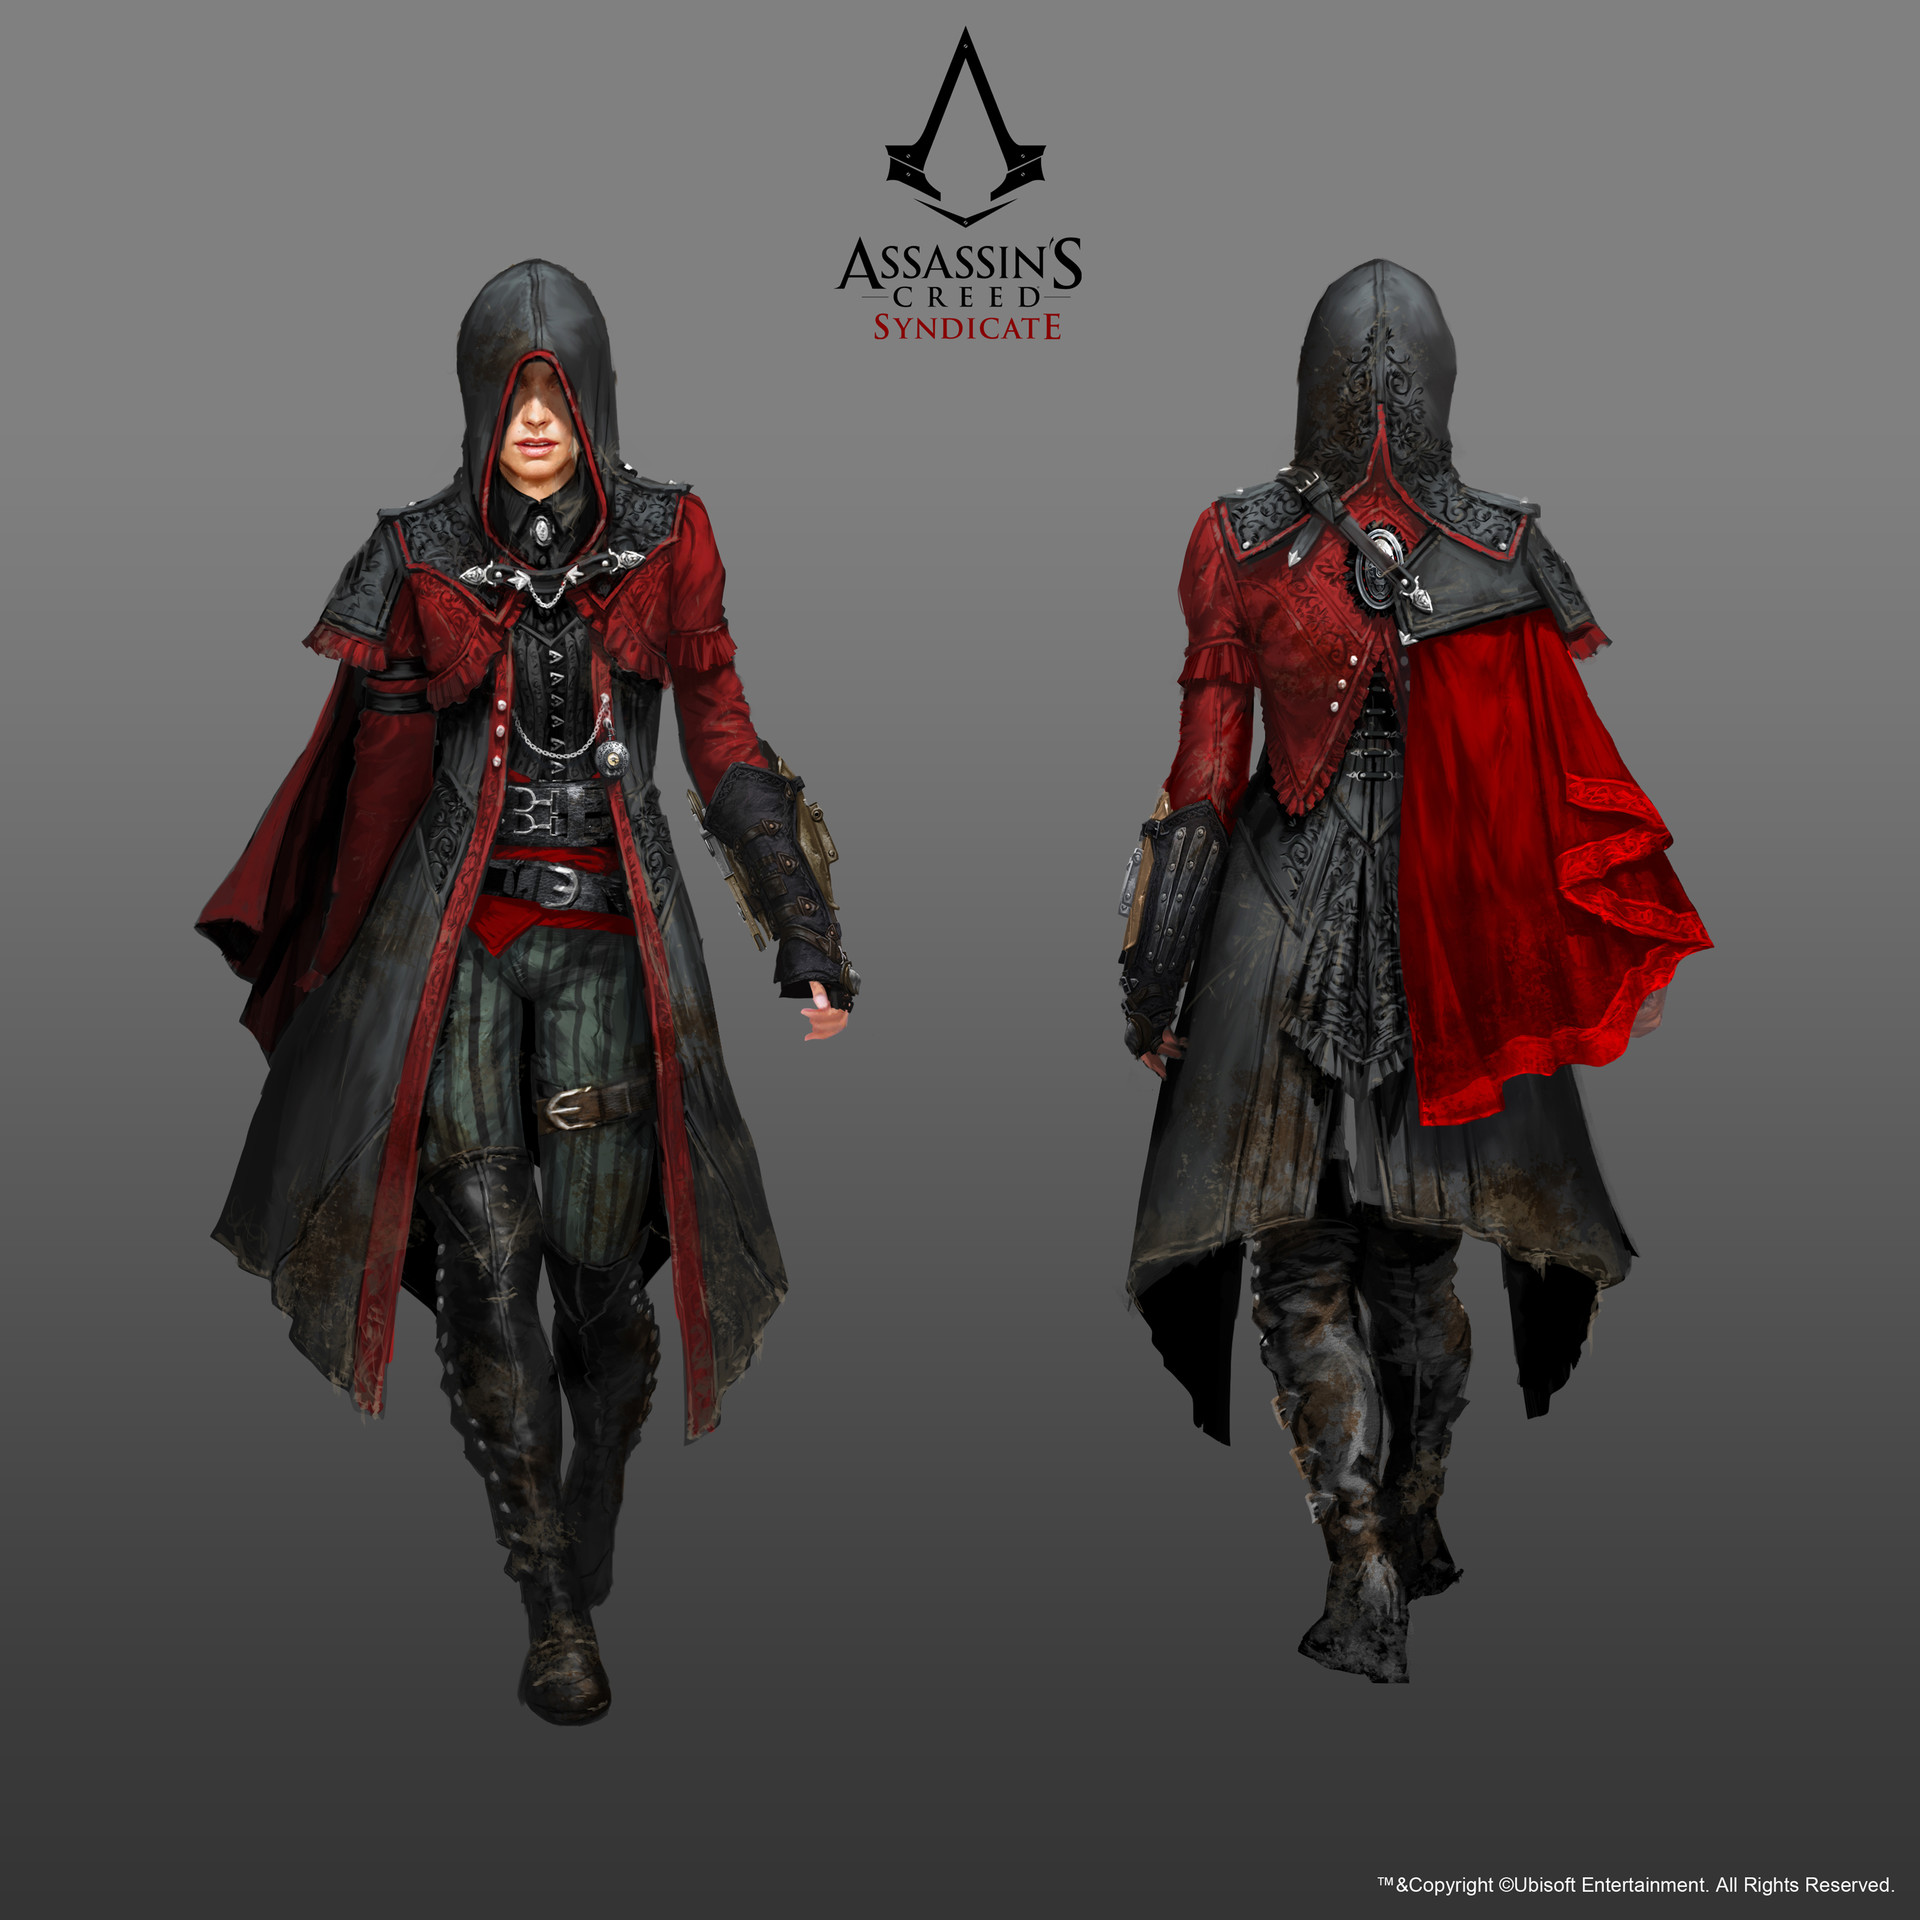 ArtStation - Assassin's Creed Syndicate.